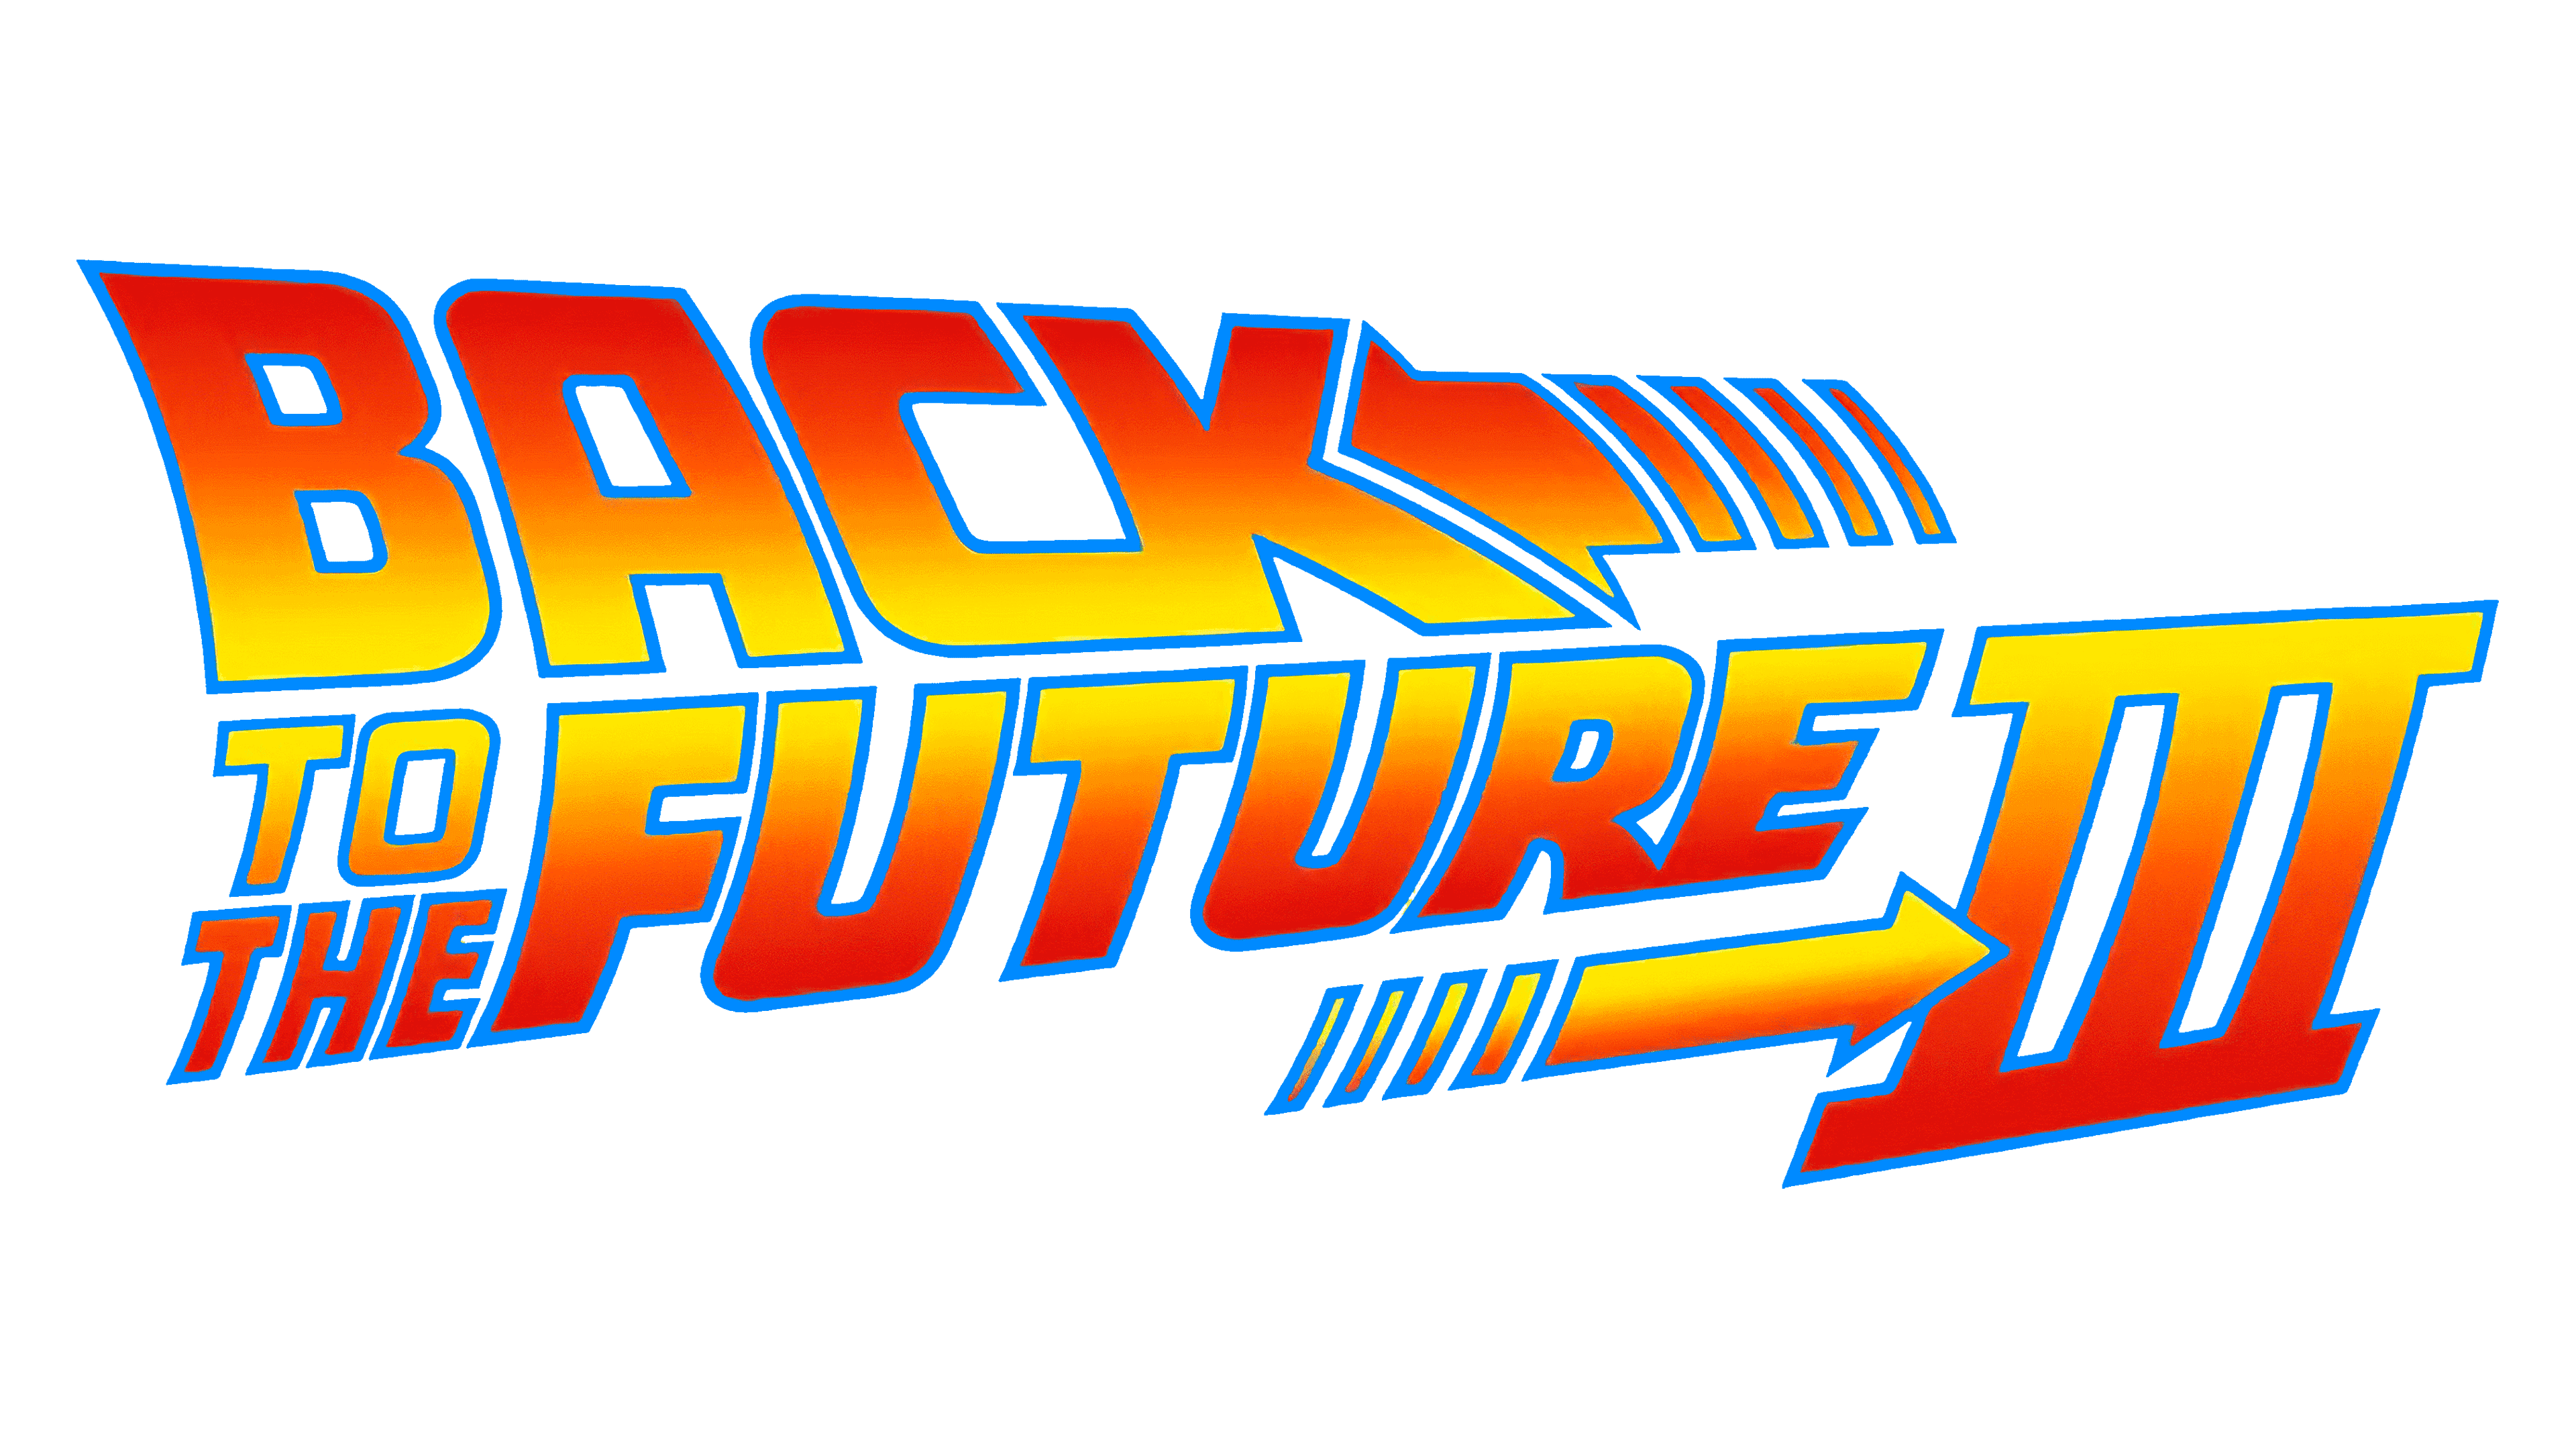 back to the future logo png